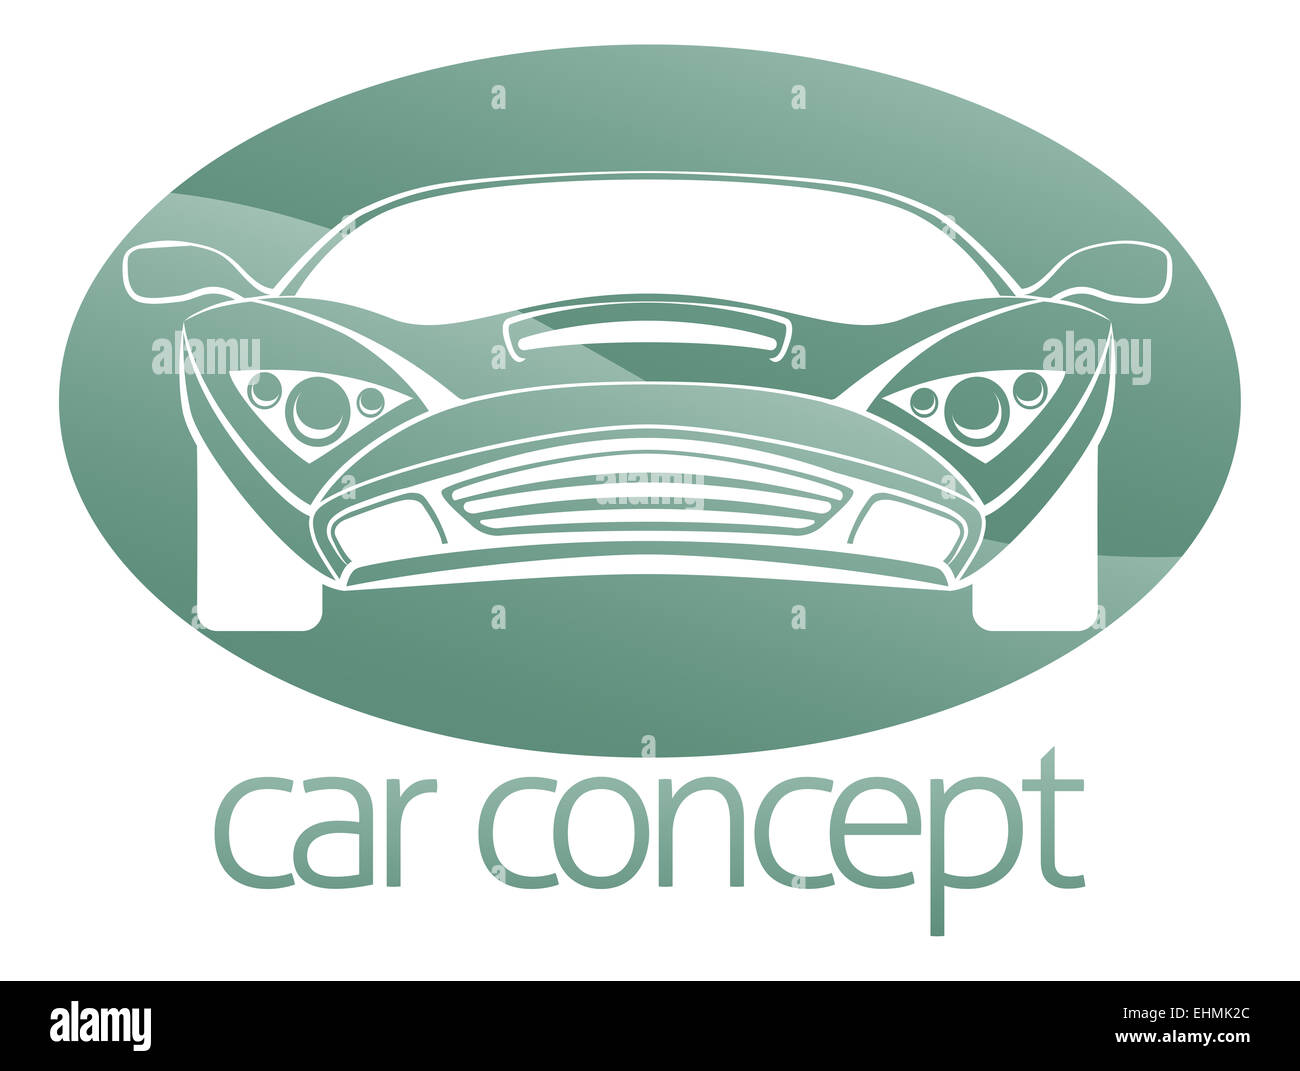 An abstract illustration of a luxury sports car circle concept design Stock Photo